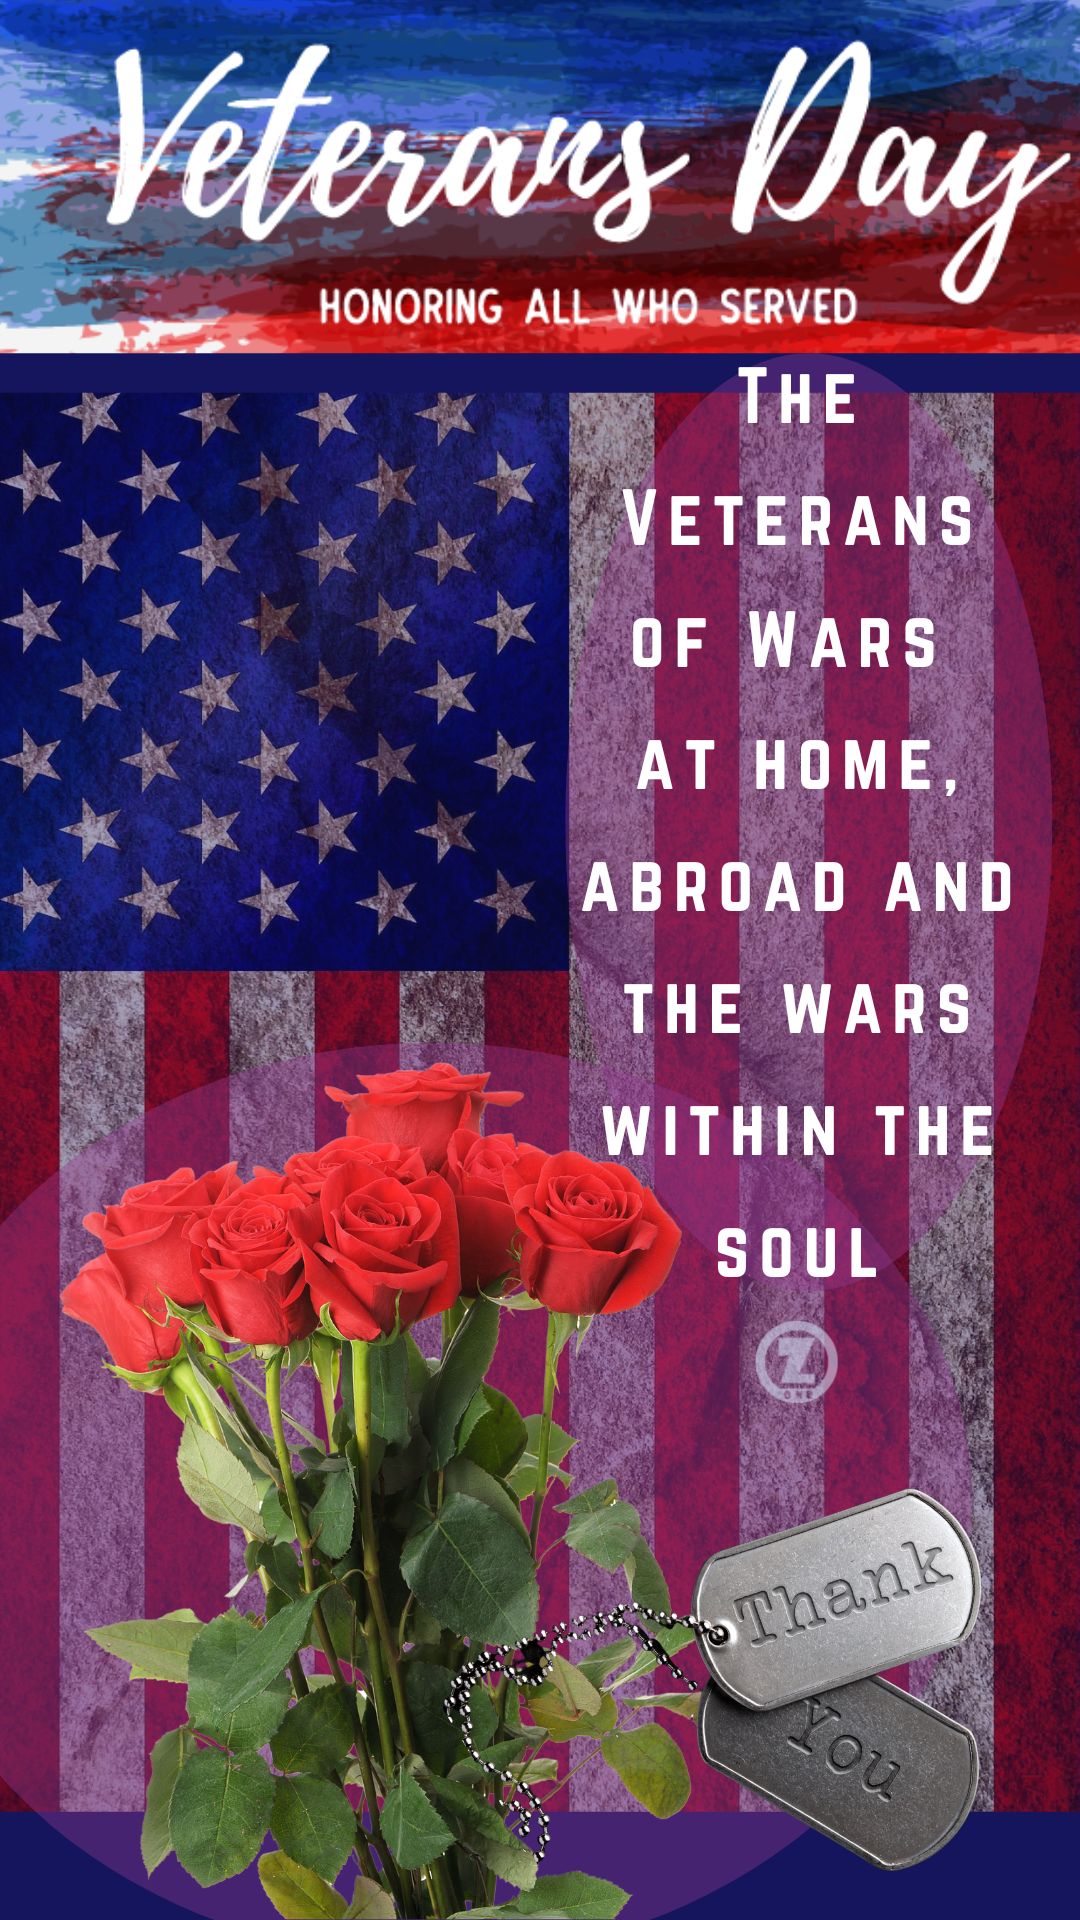 You are currently viewing A Few Ways We can Honor the Veterans of Wars at Home, Abroad and the Wars within the Soul – Step 8